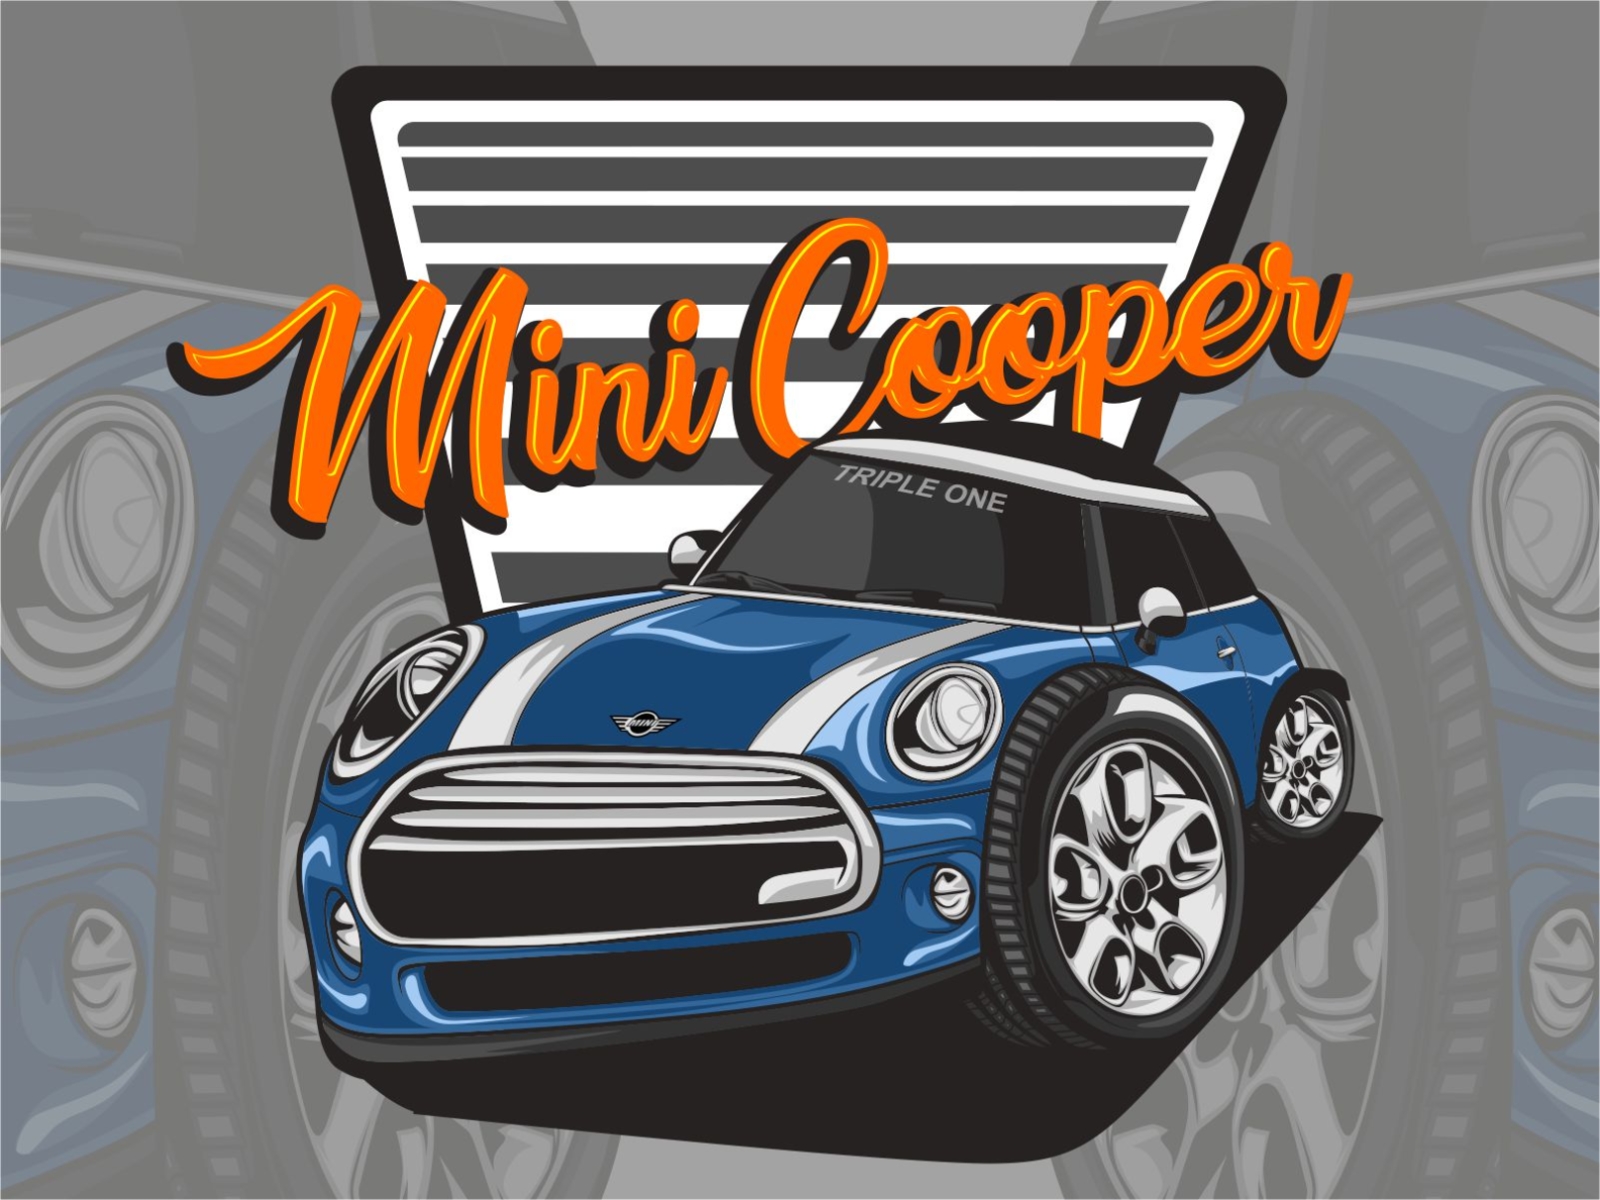 Mini Cooper by Triple One Design on Dribbble